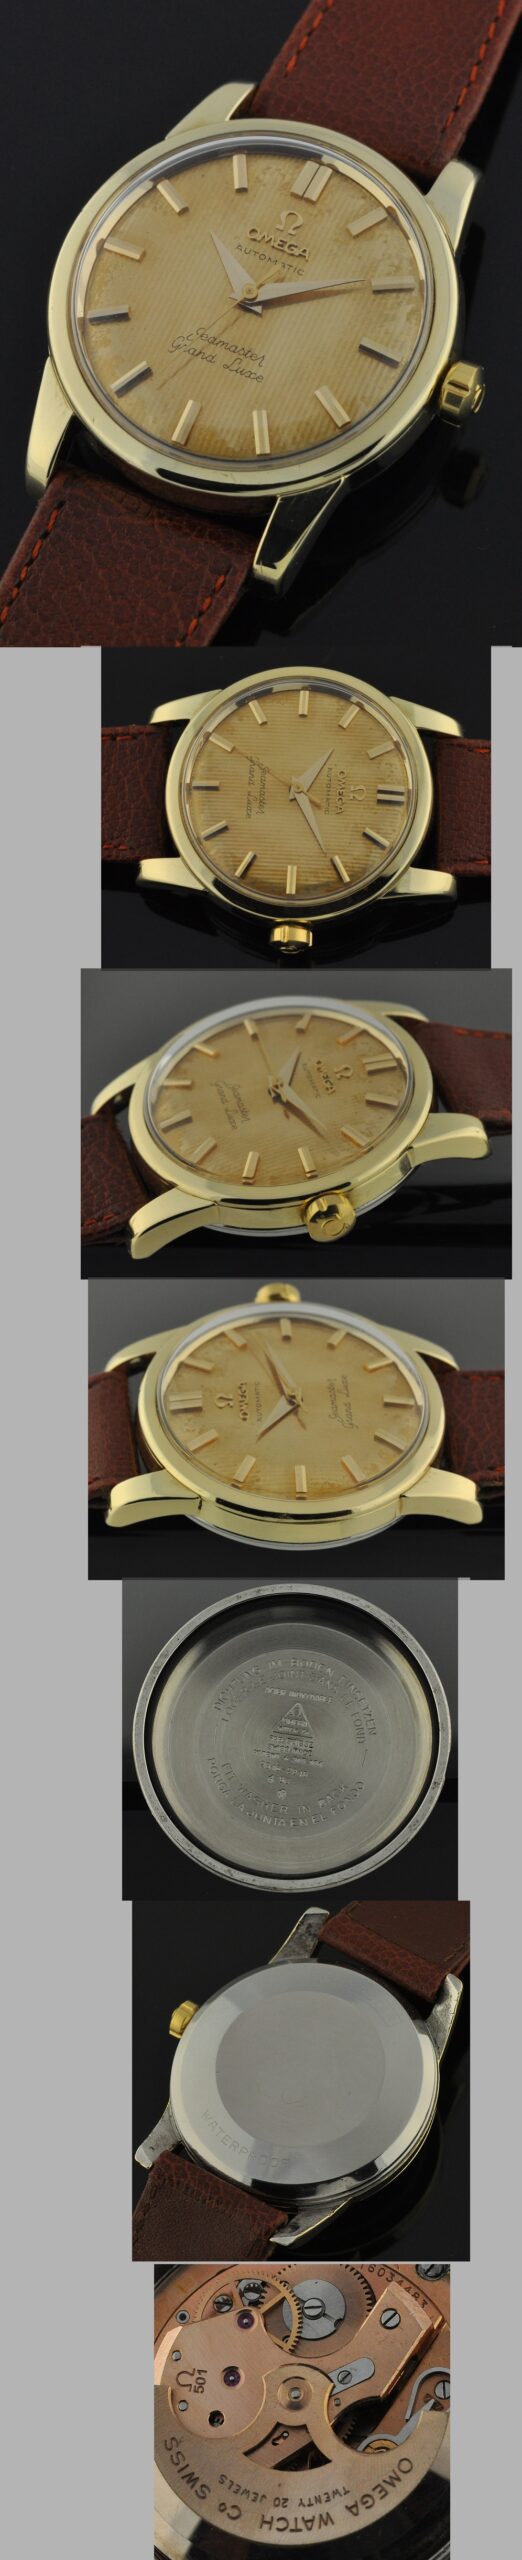 This is a 1958 Omega Seamaster Grand Luxe.